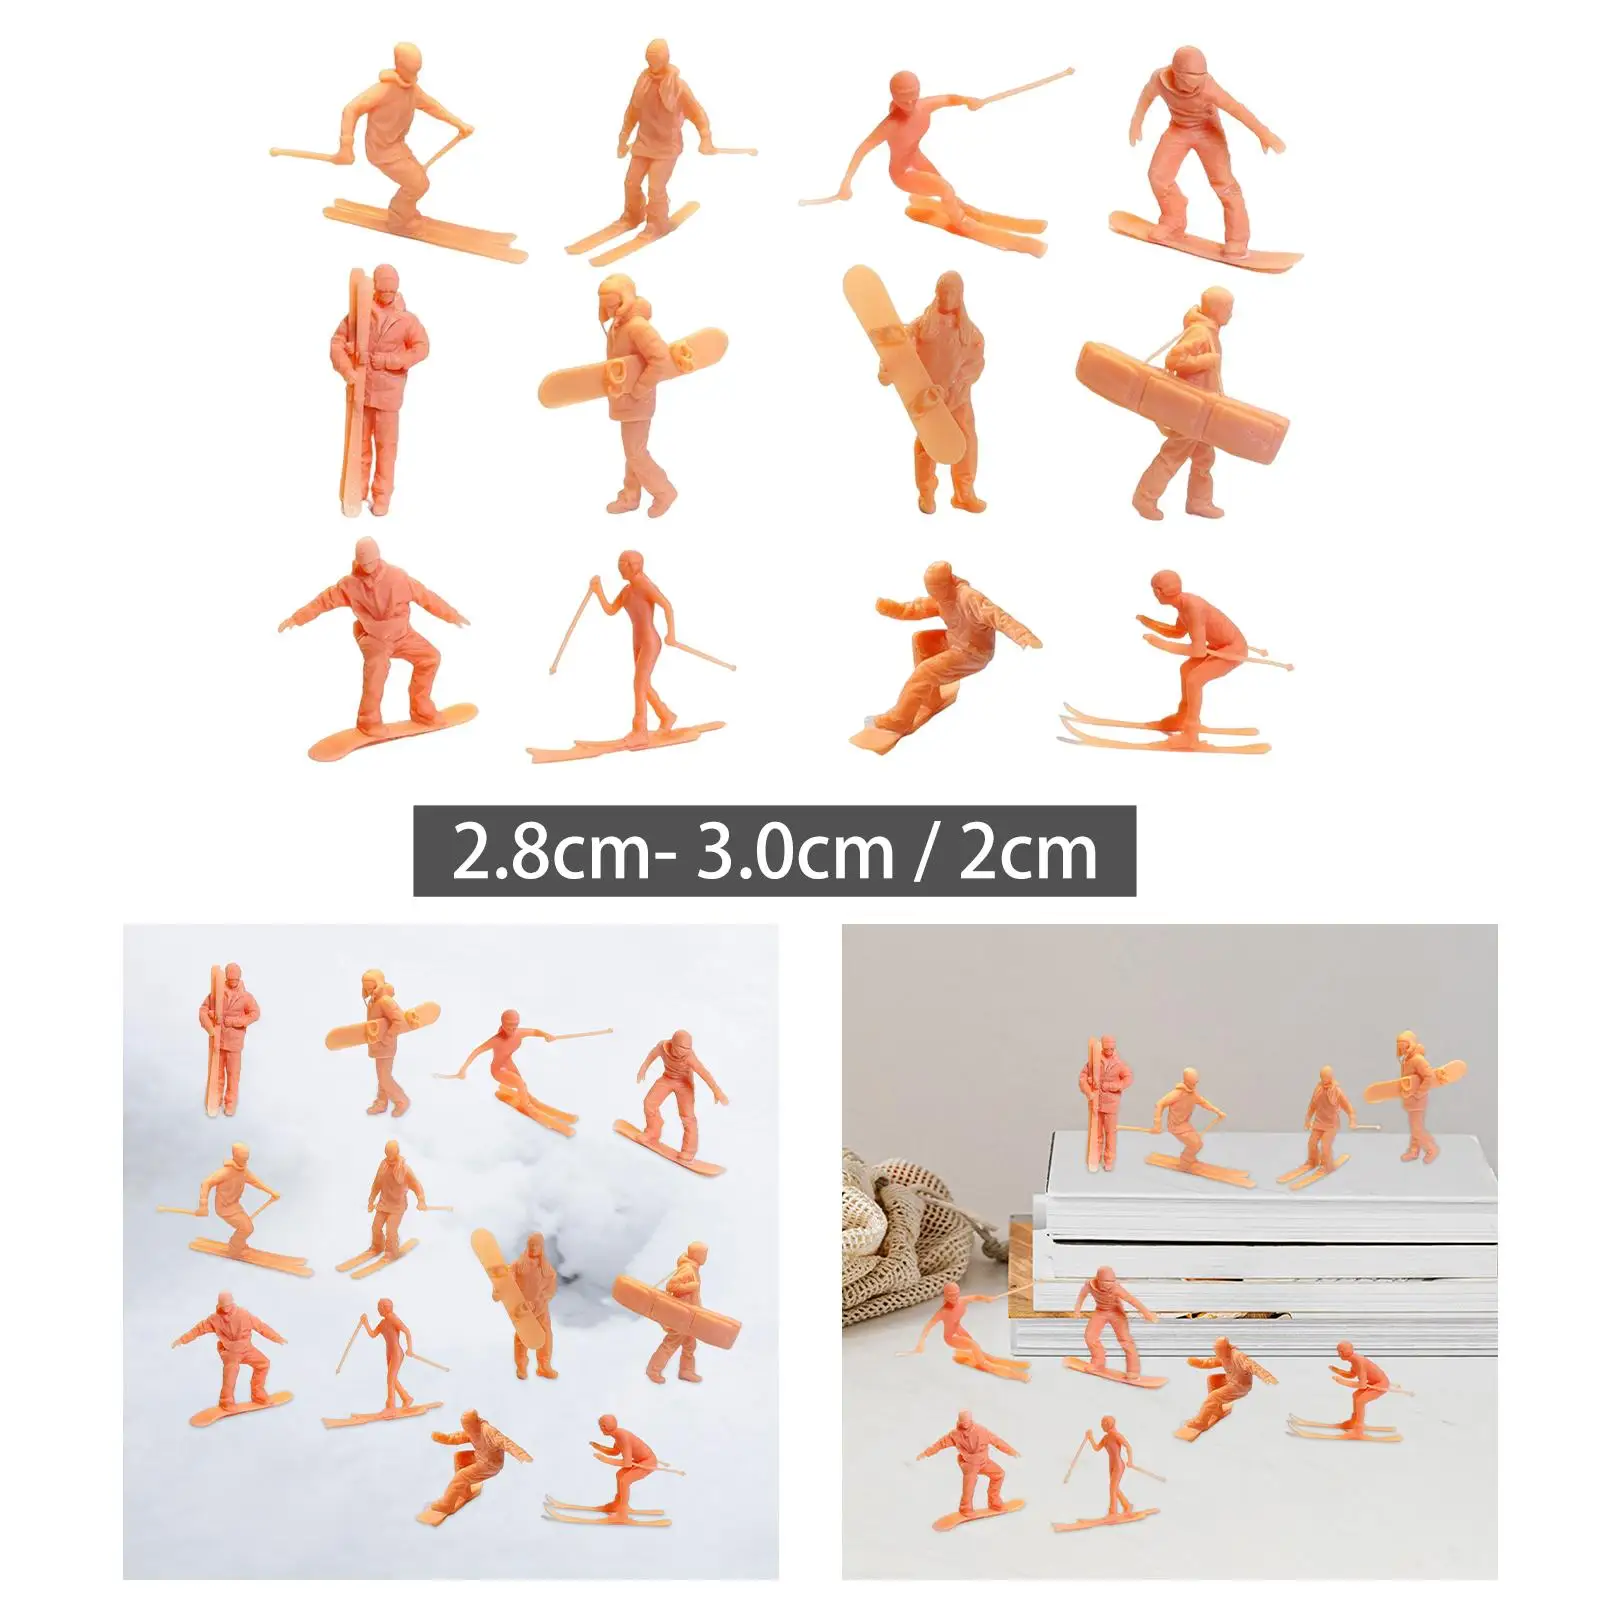 Realistic Skiing Figures Fairy Garden Toy Doll Model Small Statue for Architecture Model Garden DIY Miniatures Desk Decoration